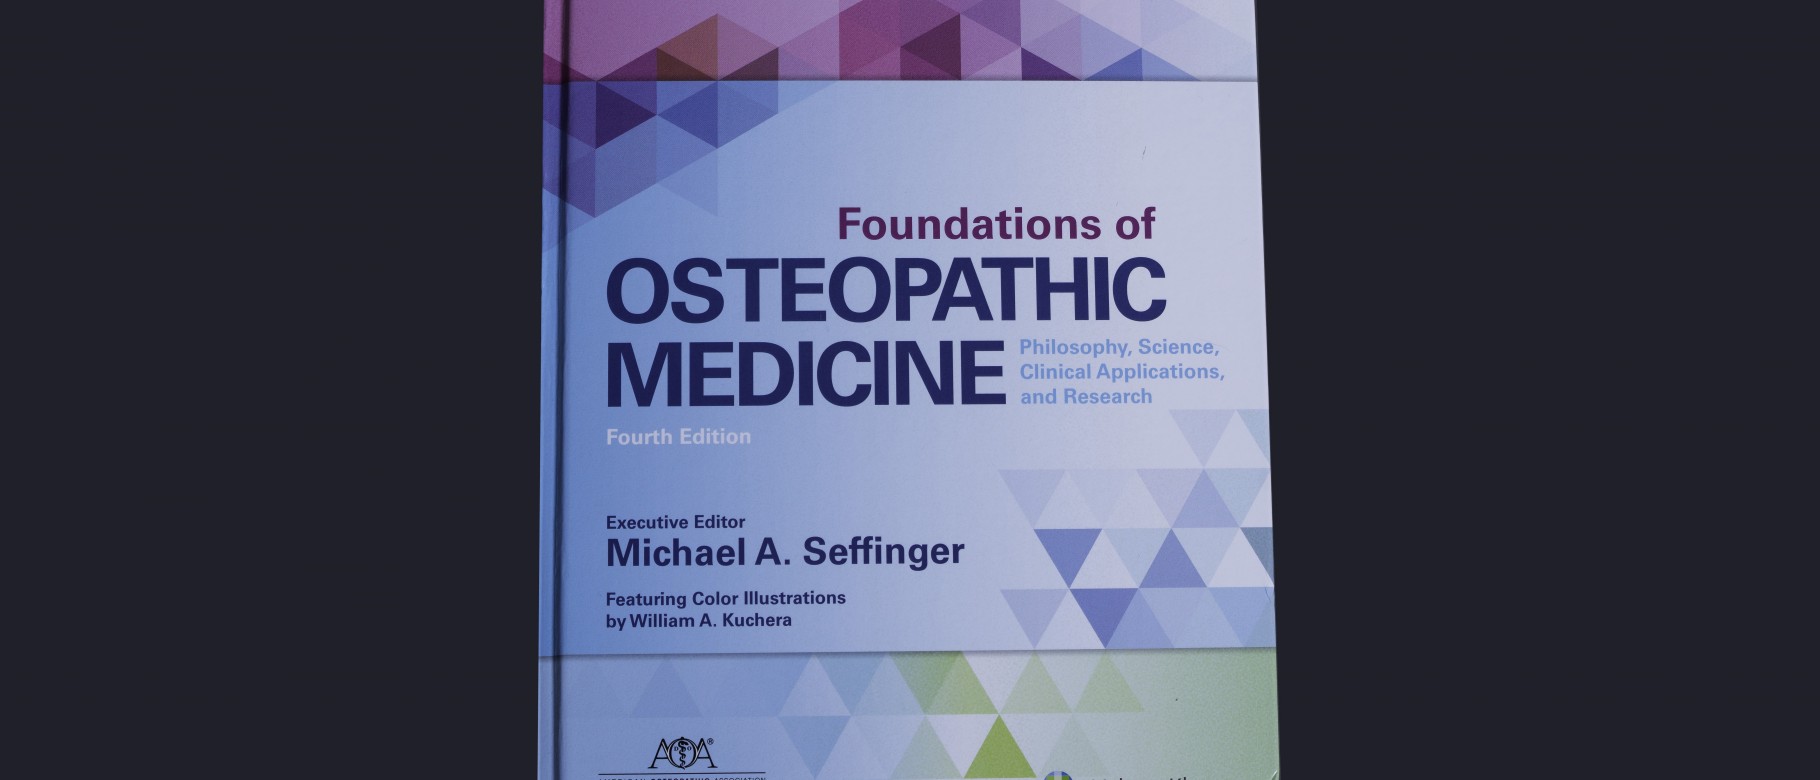 'Foundations in Osteopathic Medicine,' fourth edition